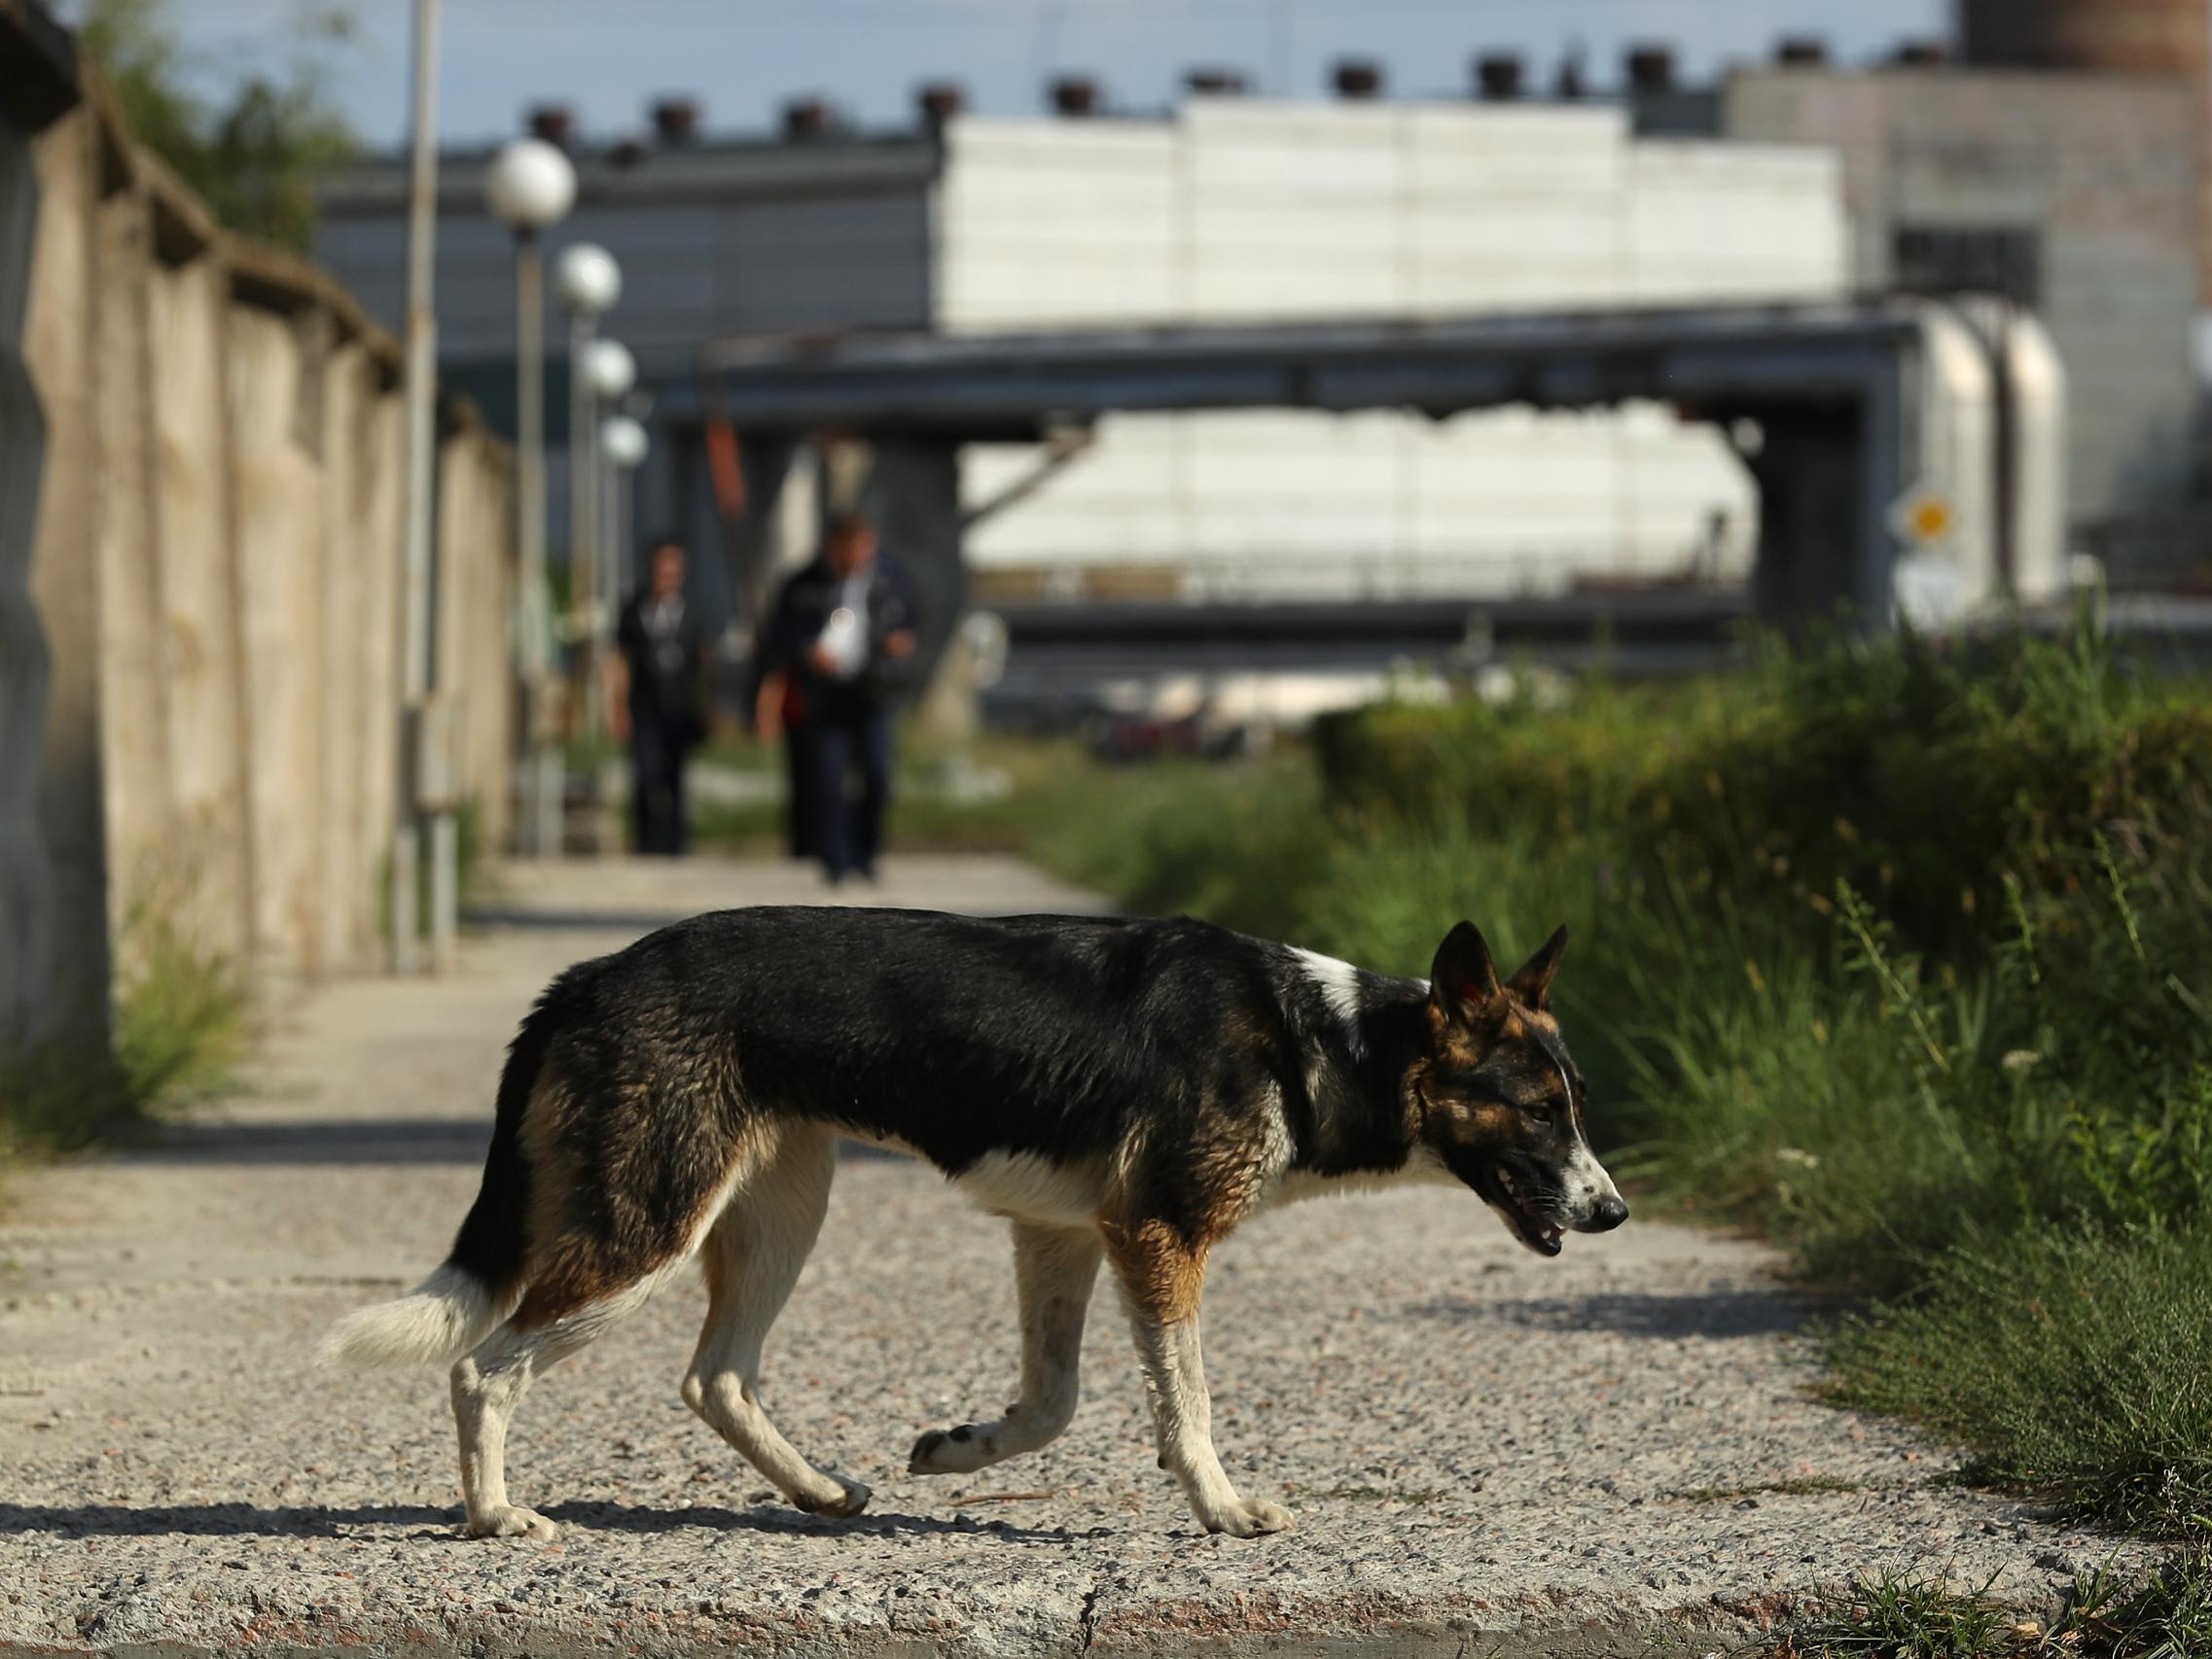 A biologist has claimed coronavirus may have originated in stray dogs